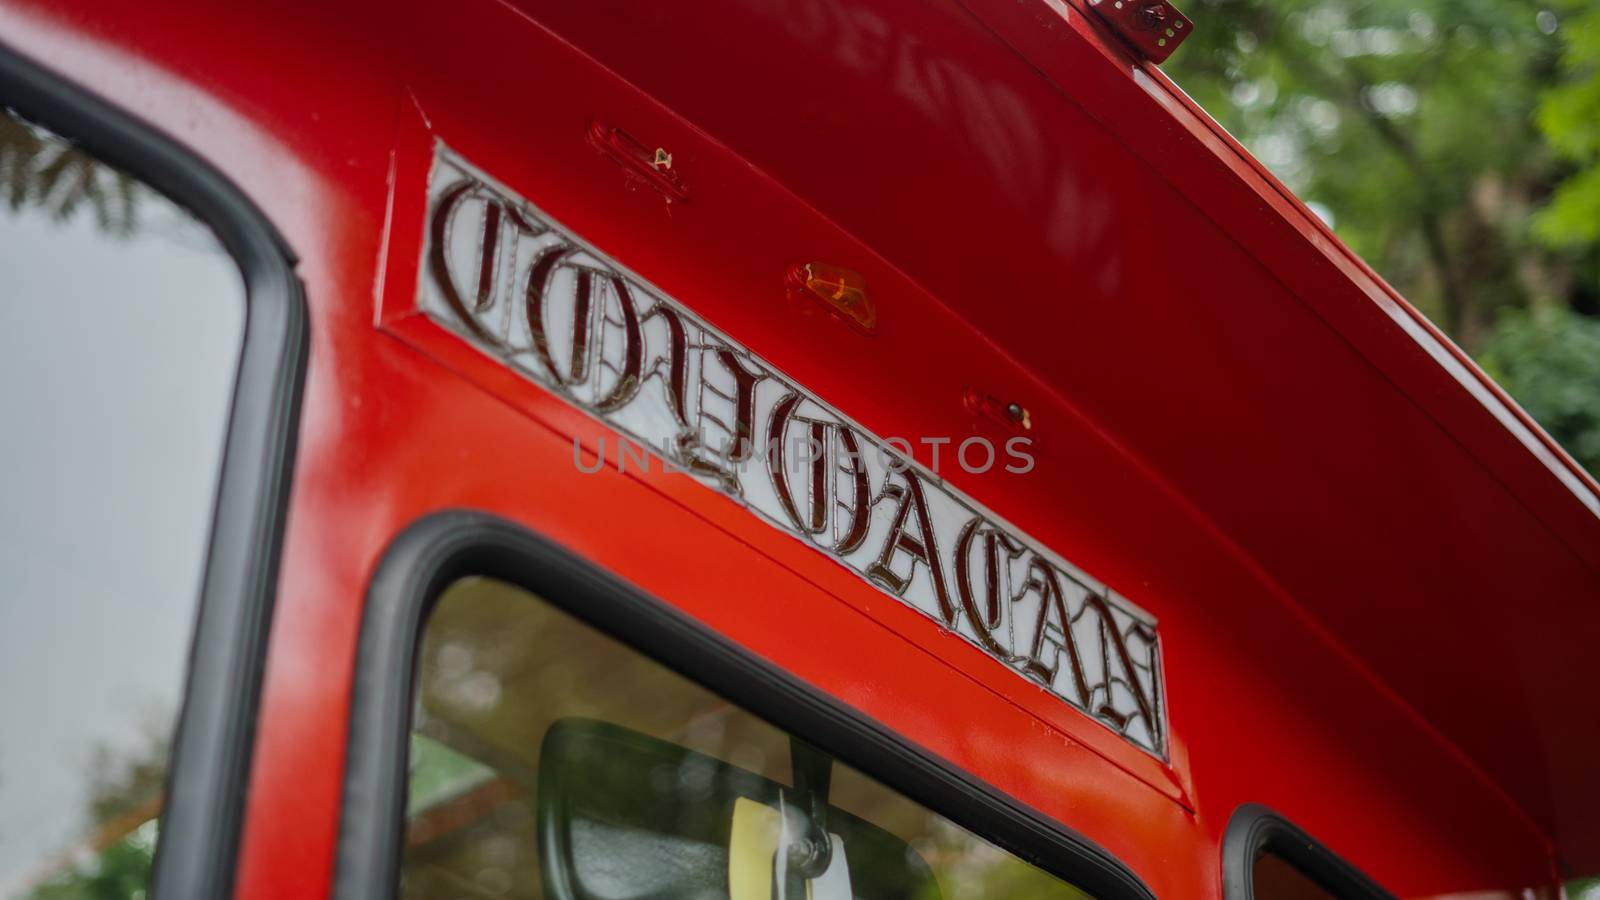 Picture of a Coyoacan Sign on a red and yellow trolley car driving on a street, with a blurry tree in the background